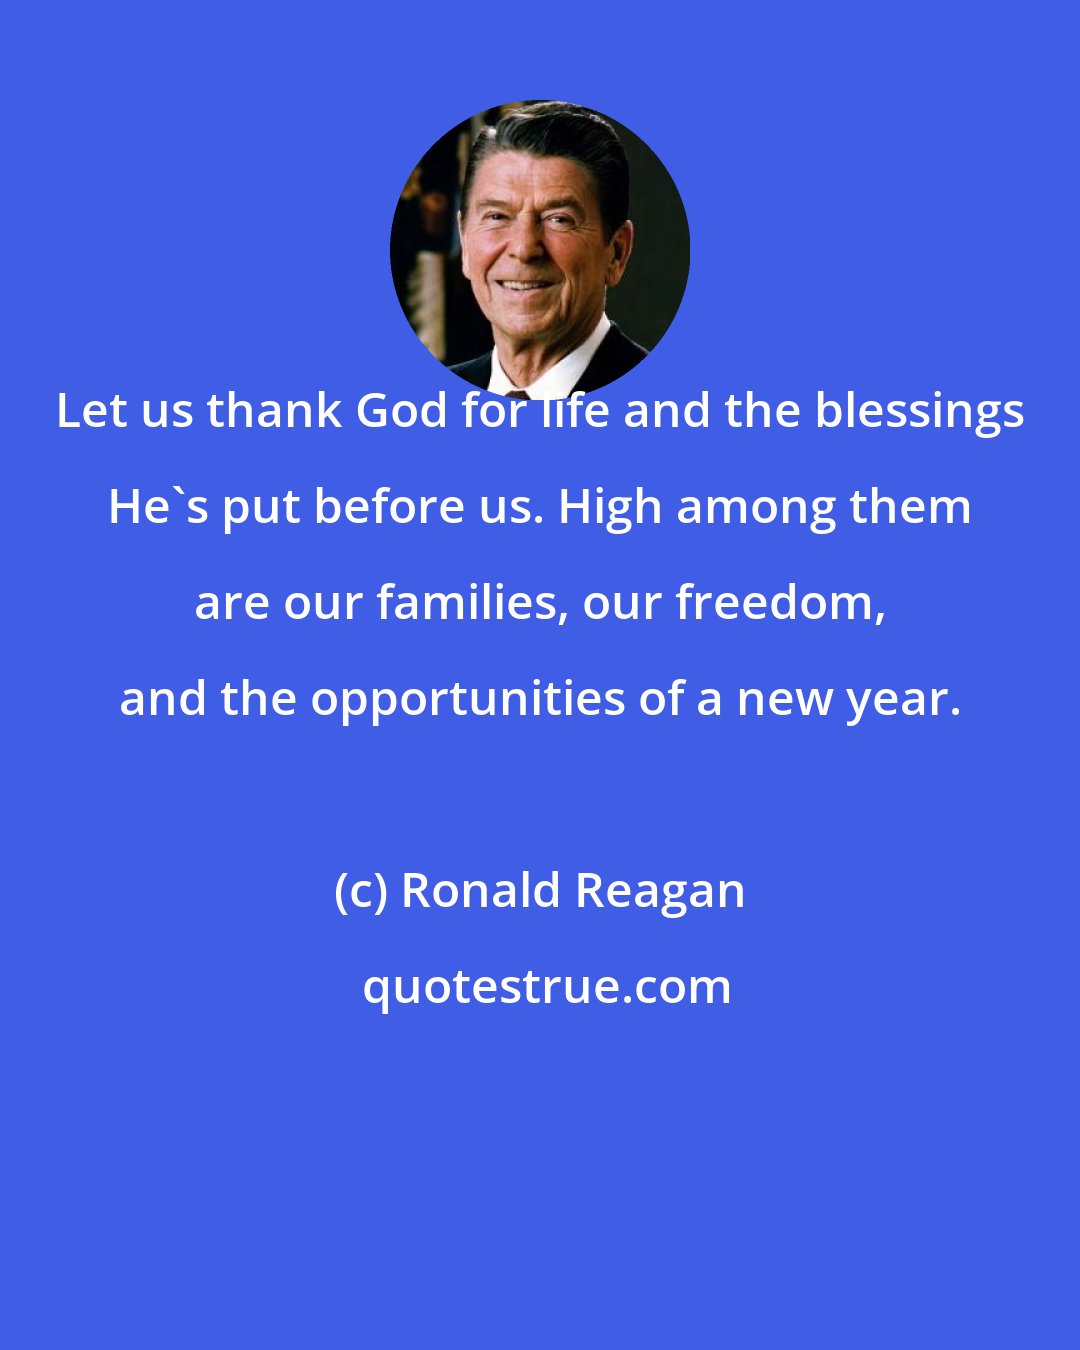 Ronald Reagan: Let us thank God for life and the blessings He's put before us. High among them are our families, our freedom, and the opportunities of a new year.